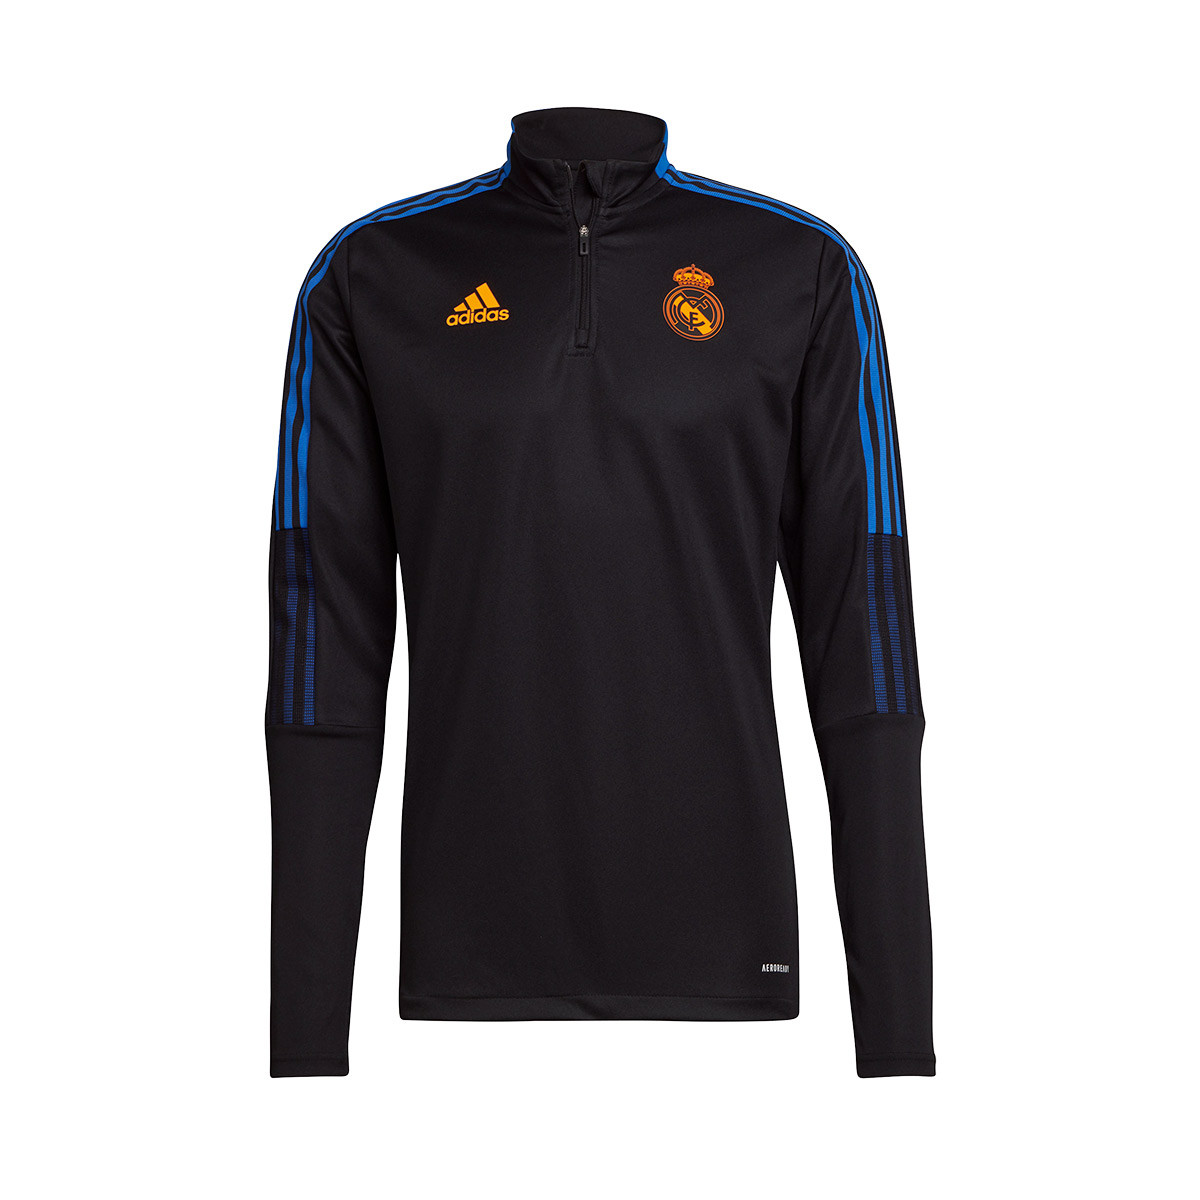 adidas performance real madrid away sports women's size small black